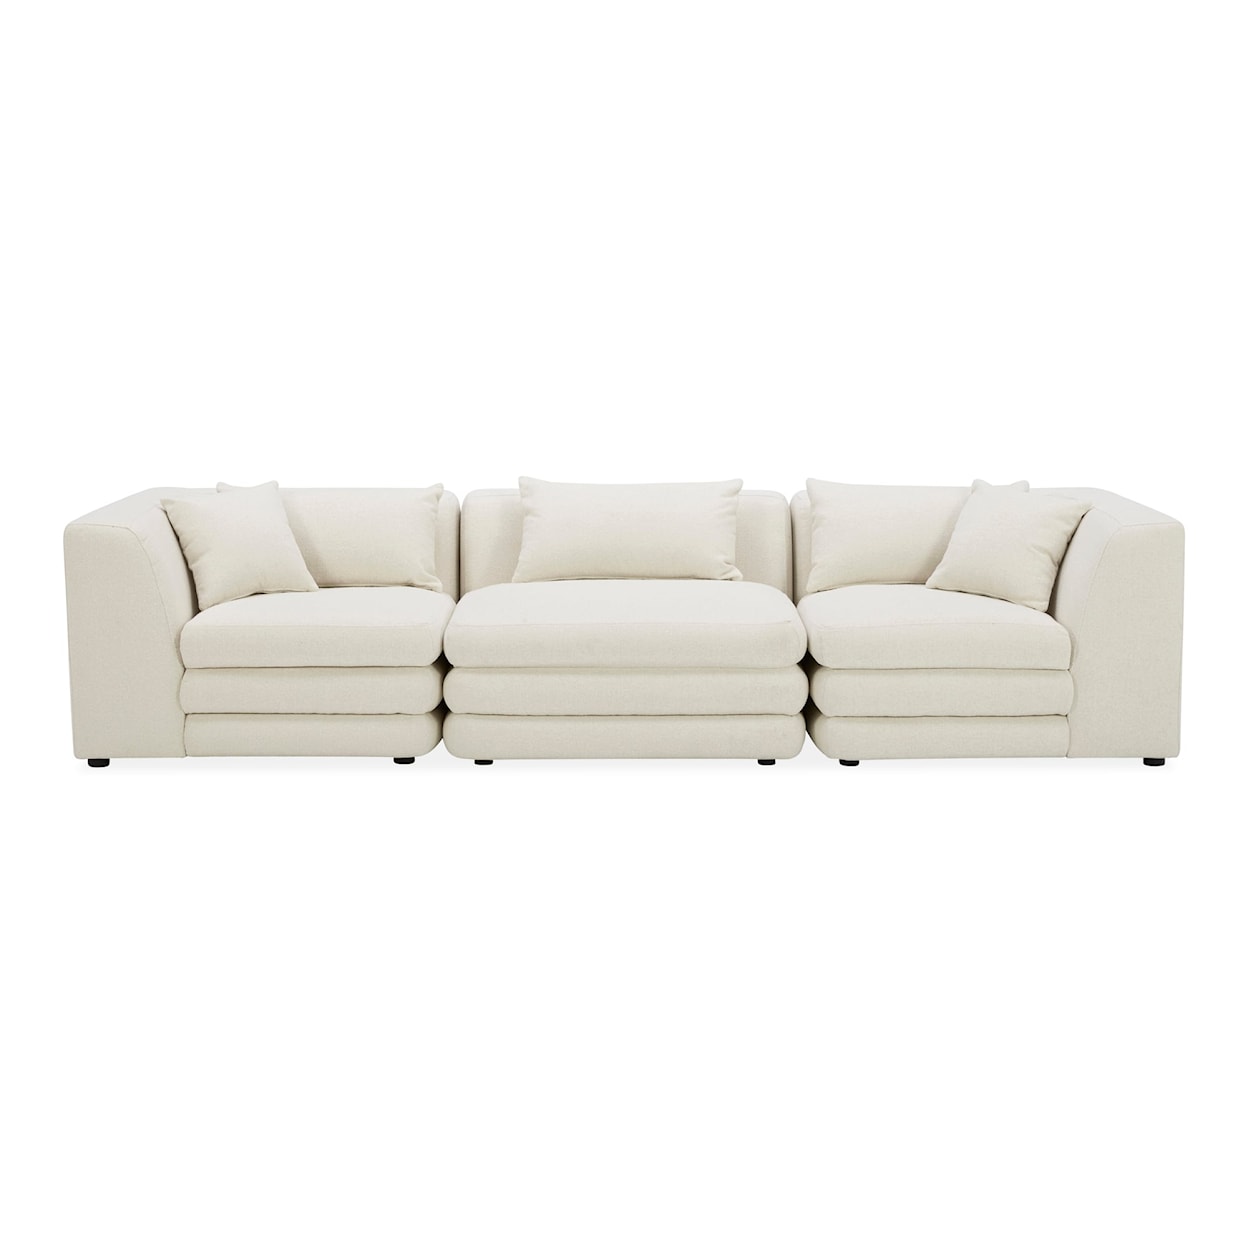 Moe's Home Collection Lowtide 3-Piece Sectional Sofa